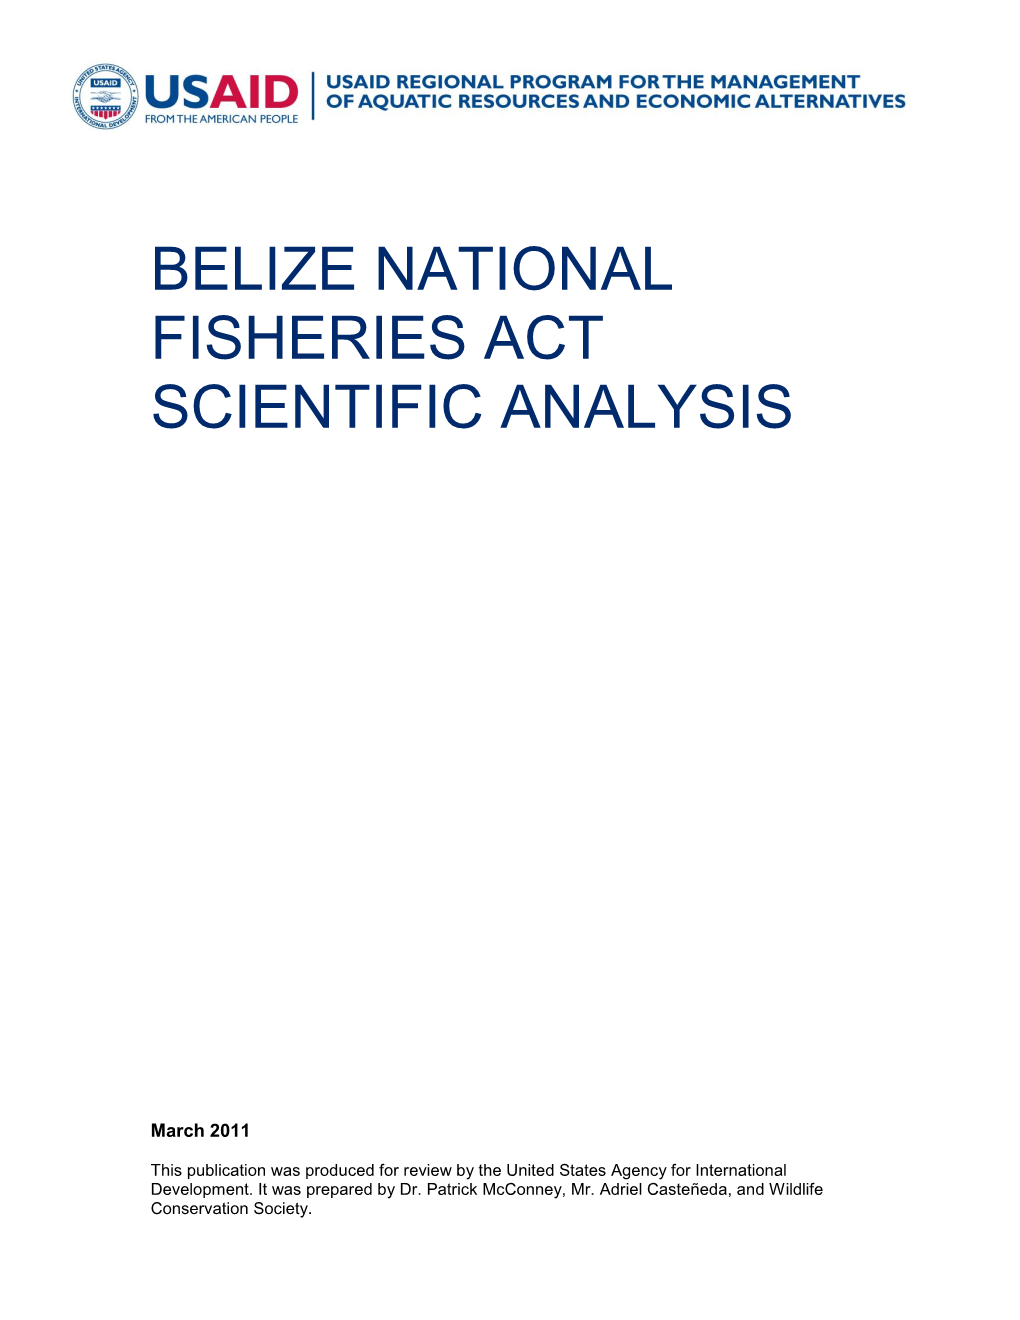 Belize National Fisheries Act Scientific Analysis